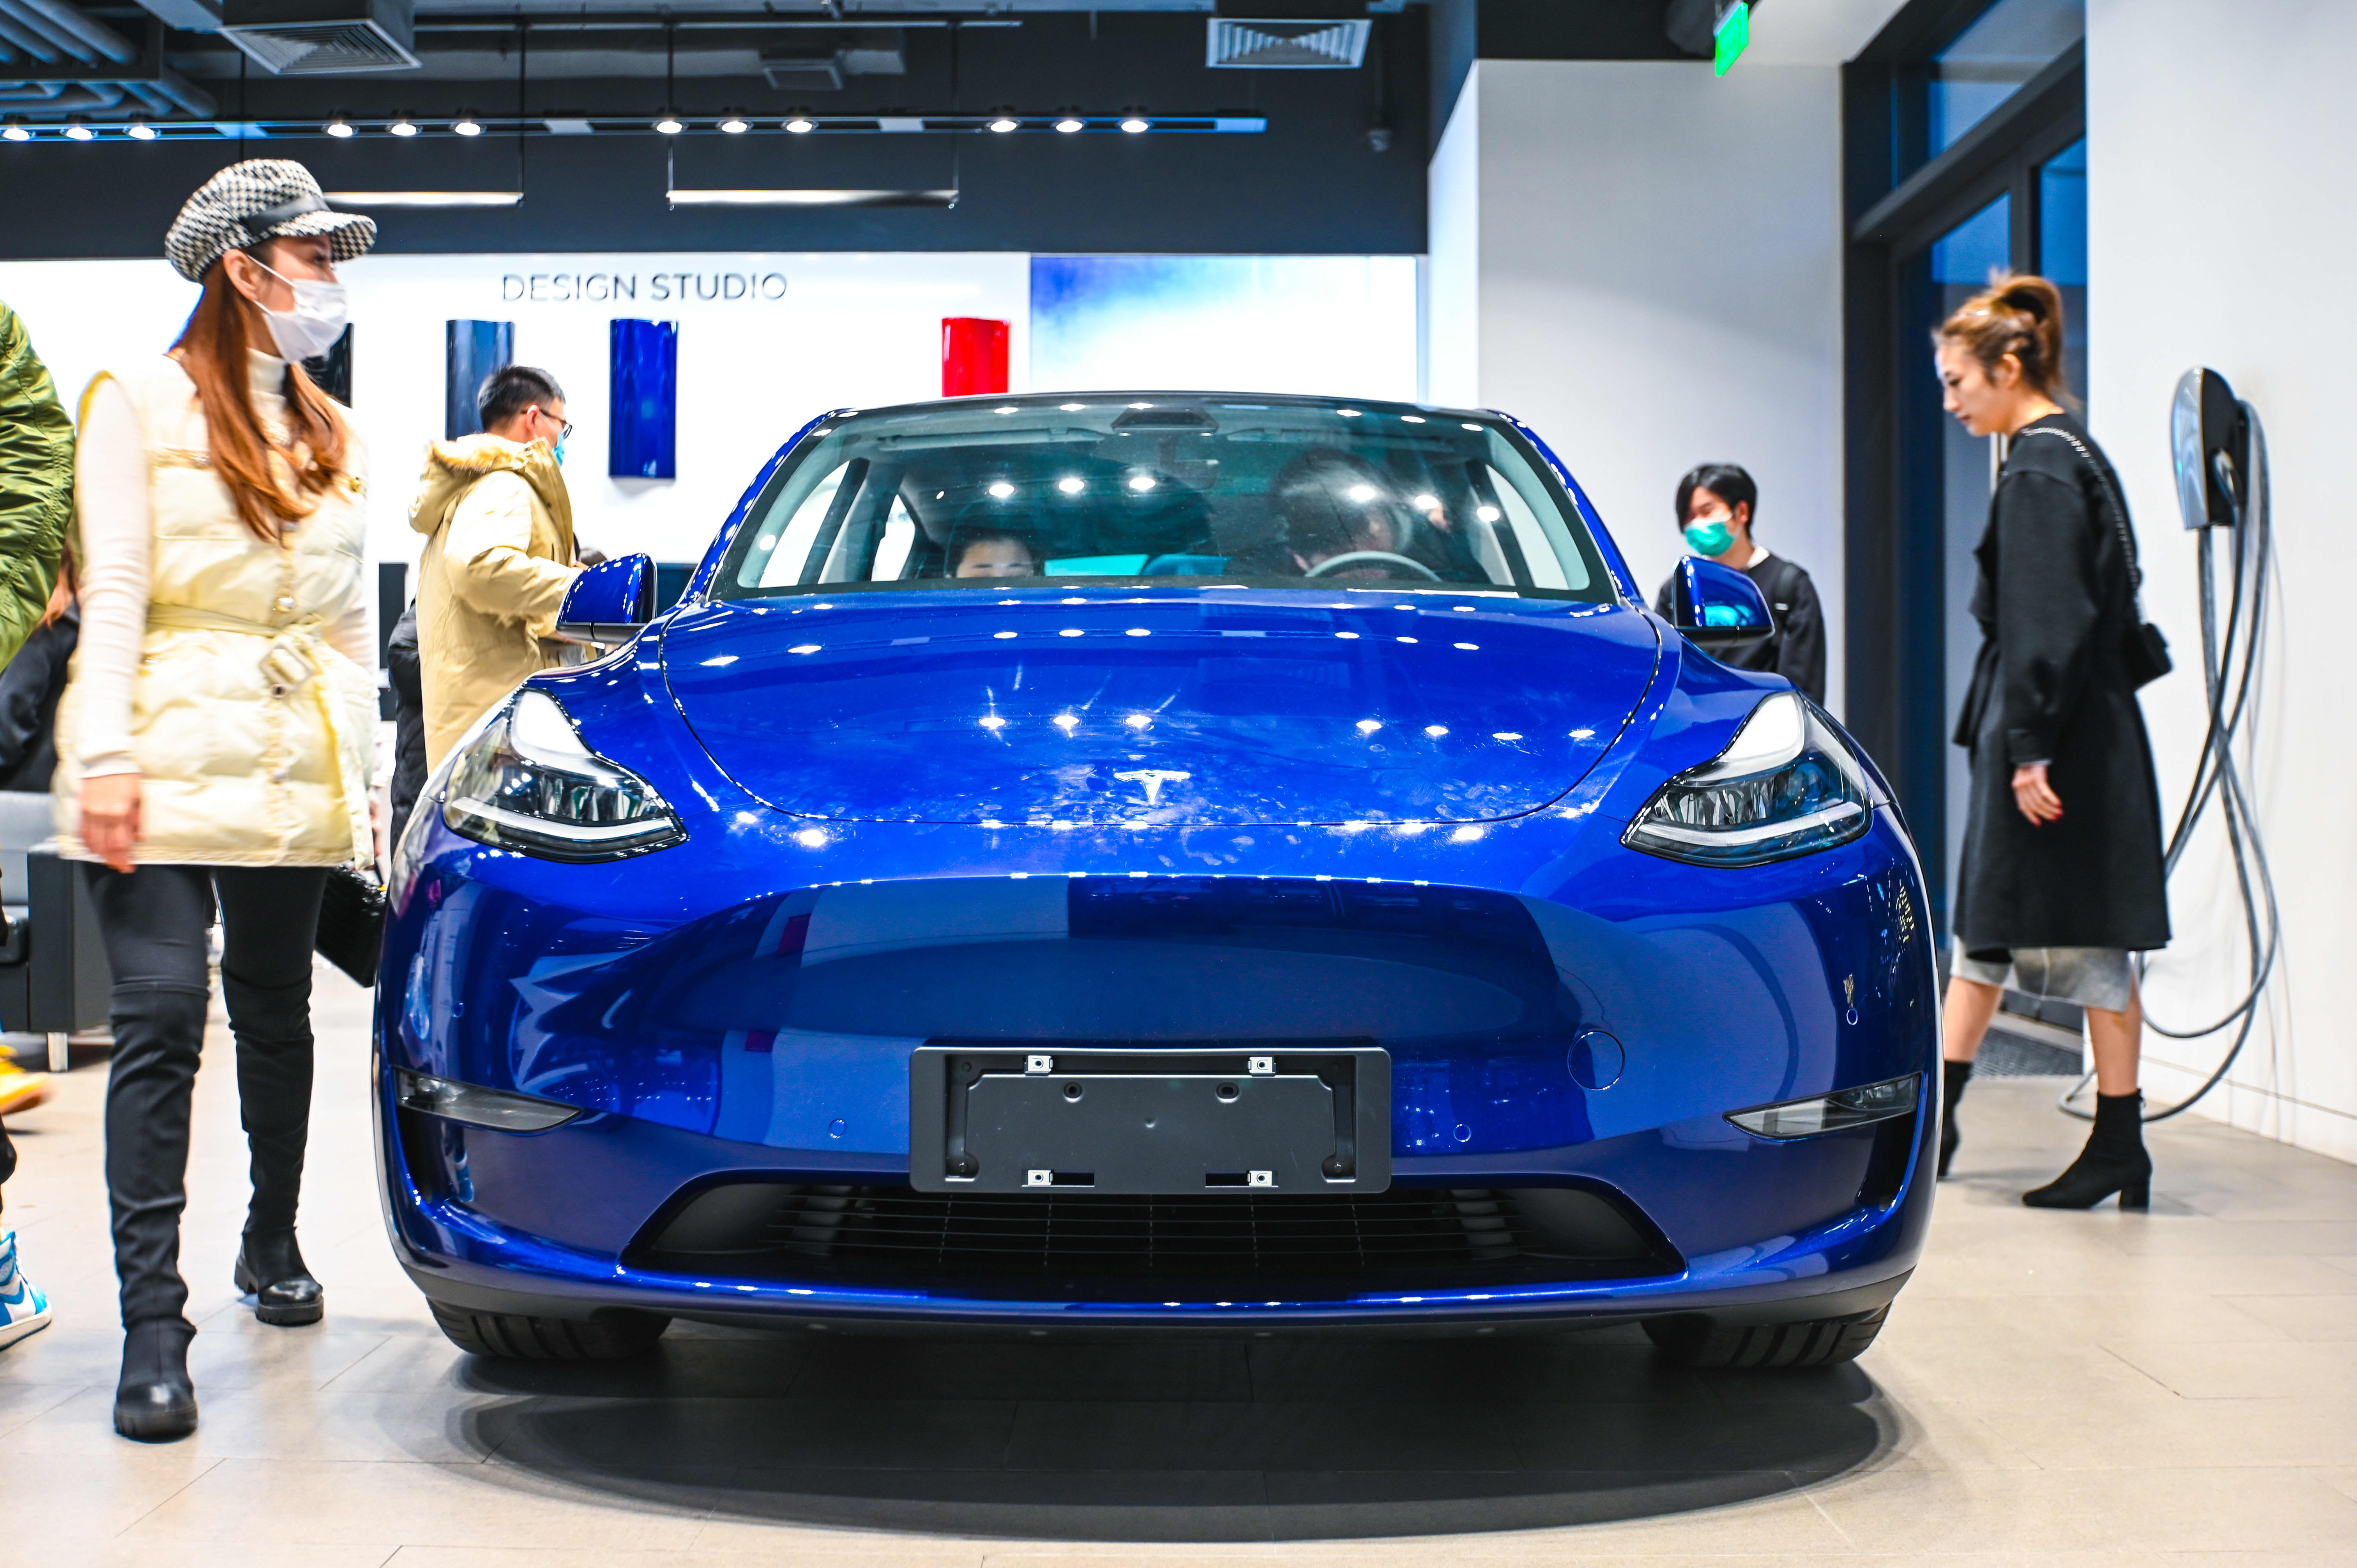 Tesla cars restricted among military personnel in China – report